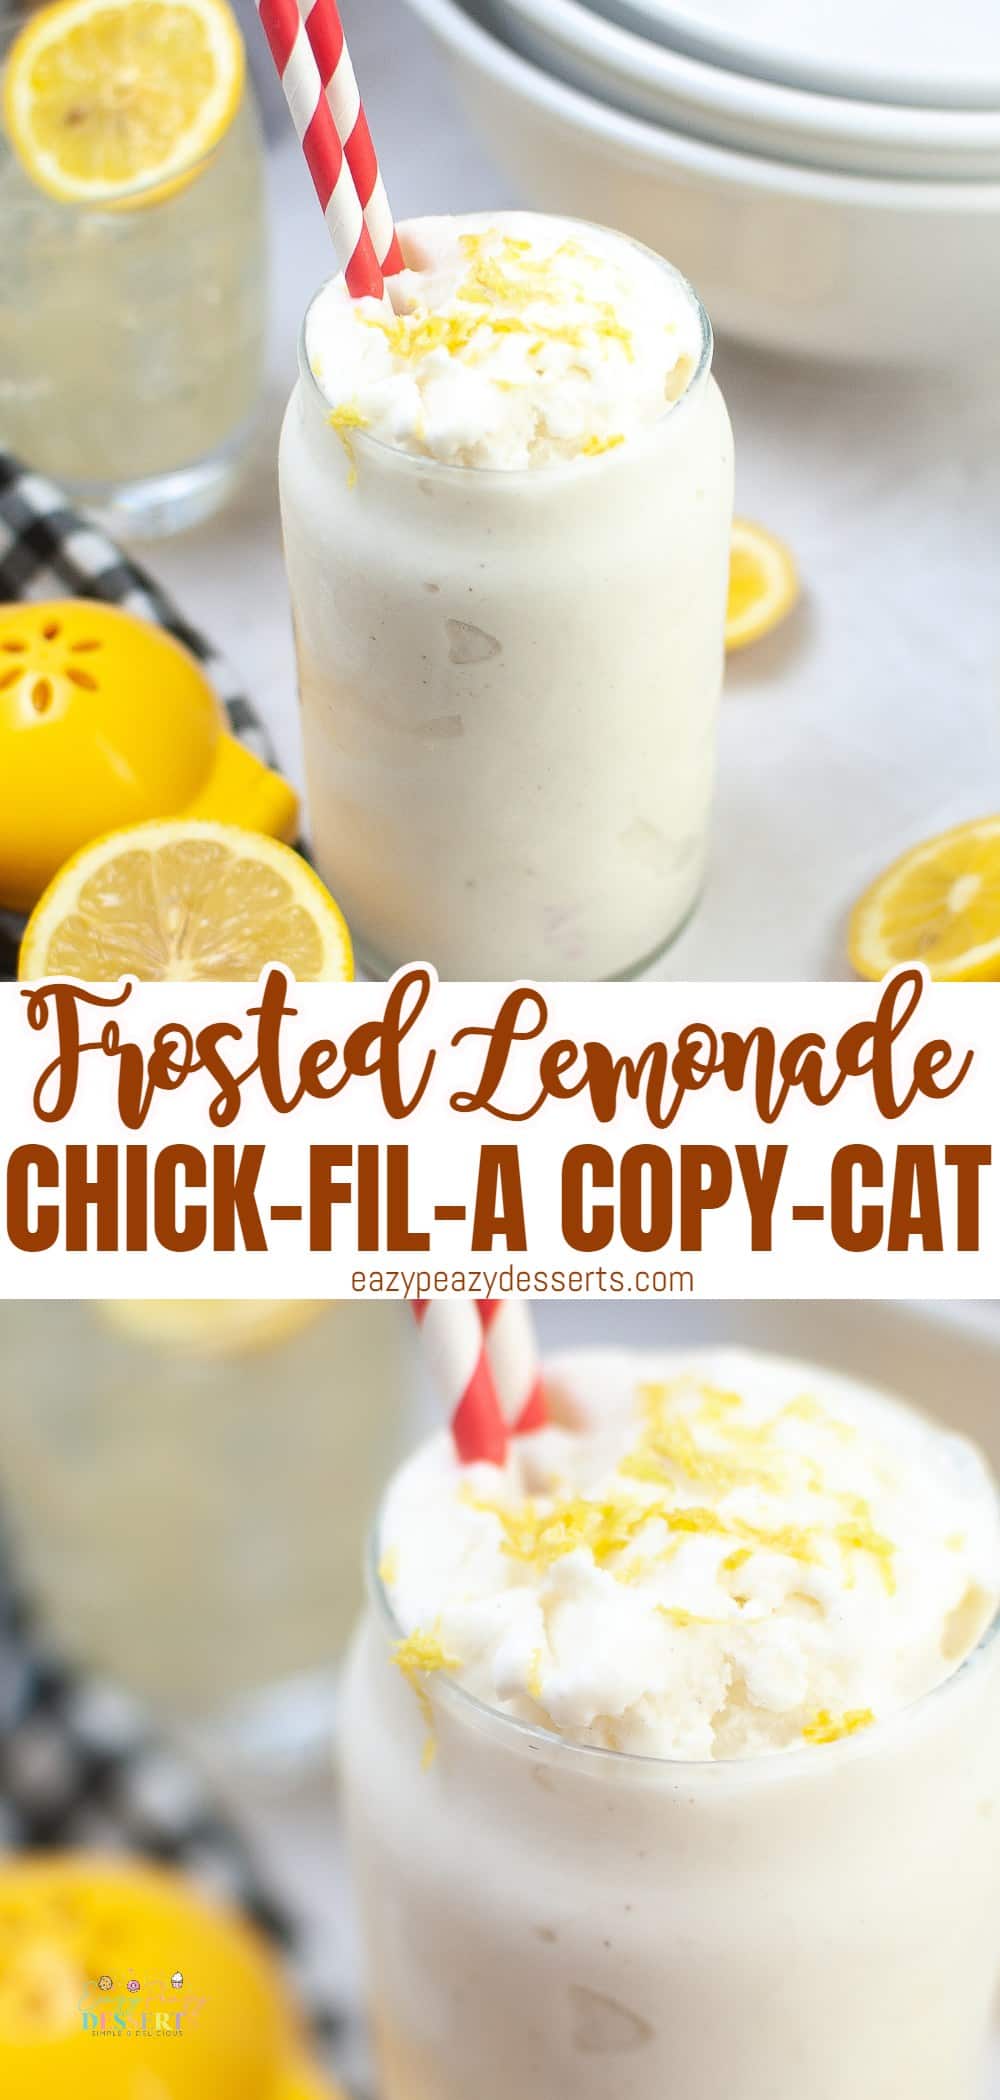 Chick fil a frosted lemonade